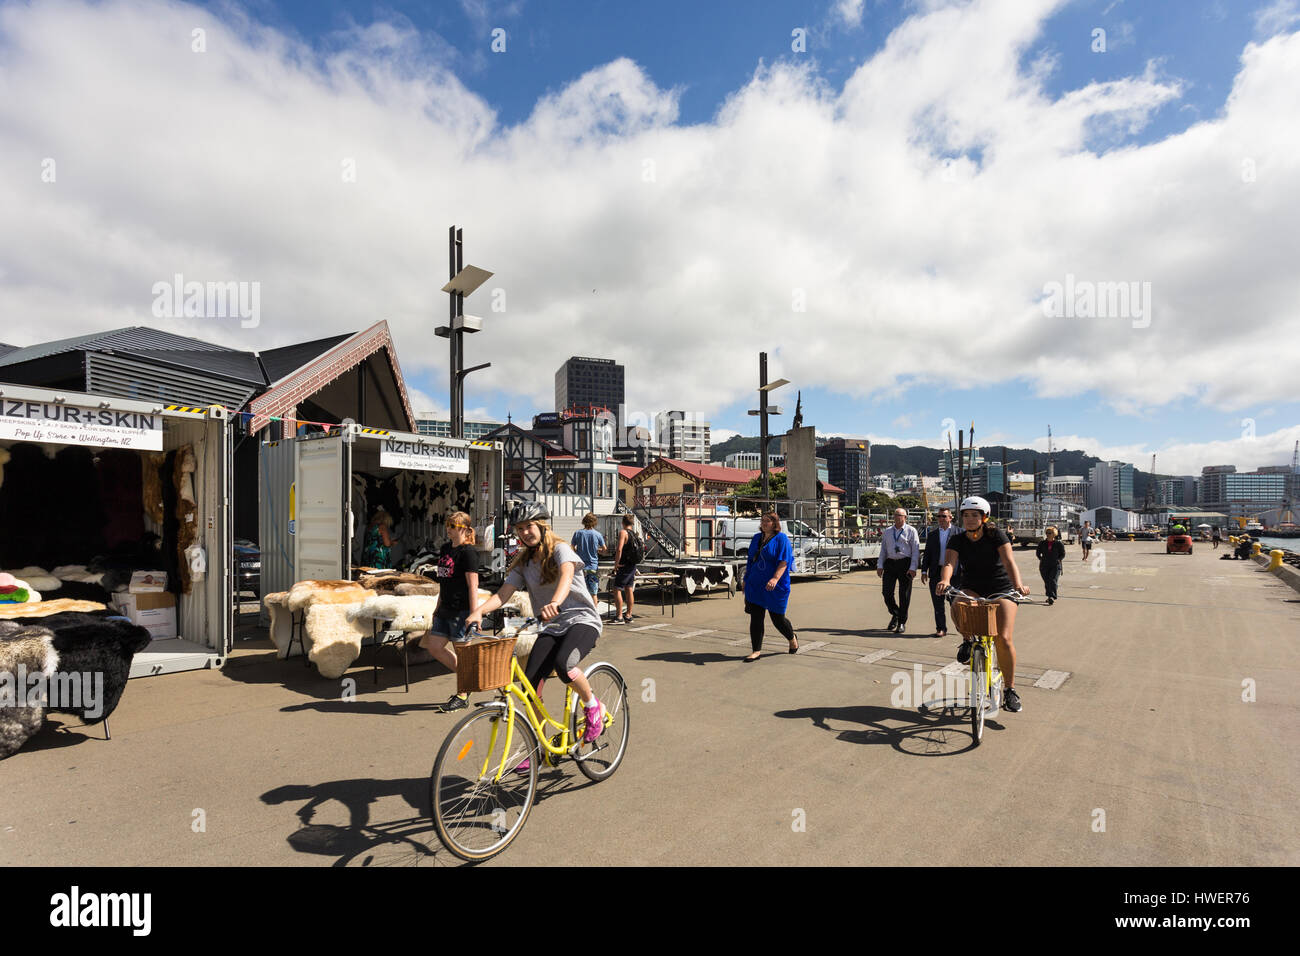 WELLINGTON, NEW ZEALAND - MARCH 2, 2017: Yound women ride biclycles in the street market in the Wellington waterfront promenade on a sunny summer day. Stock Photo